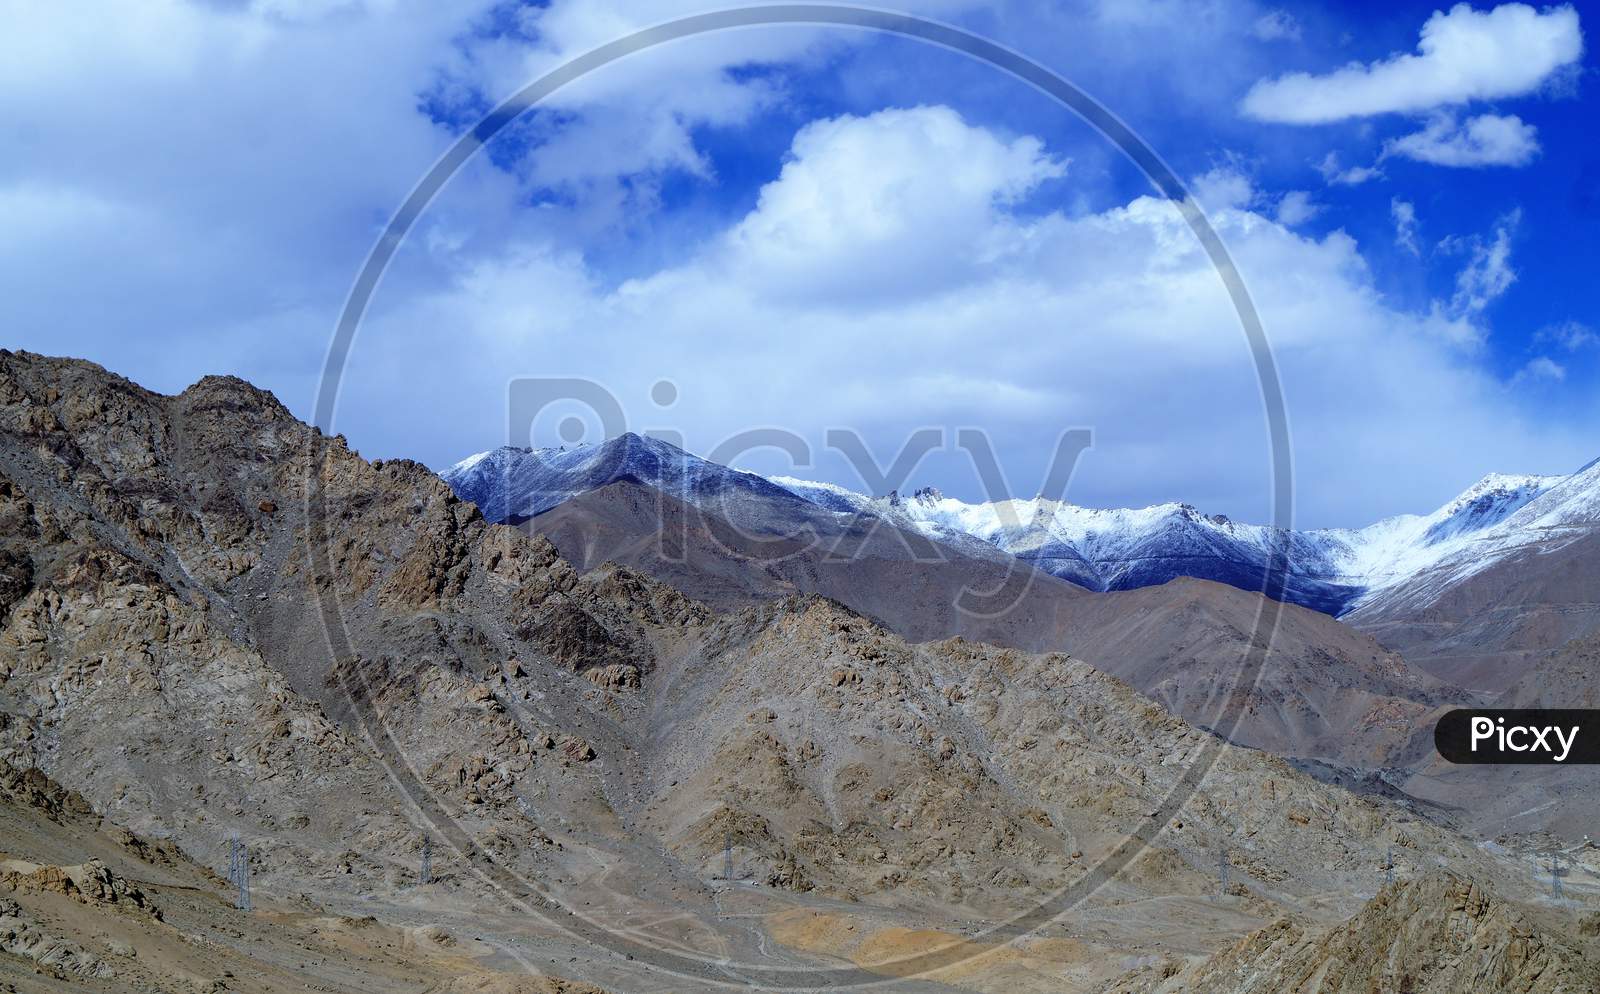 The clean and pure natural beauty of ladakh